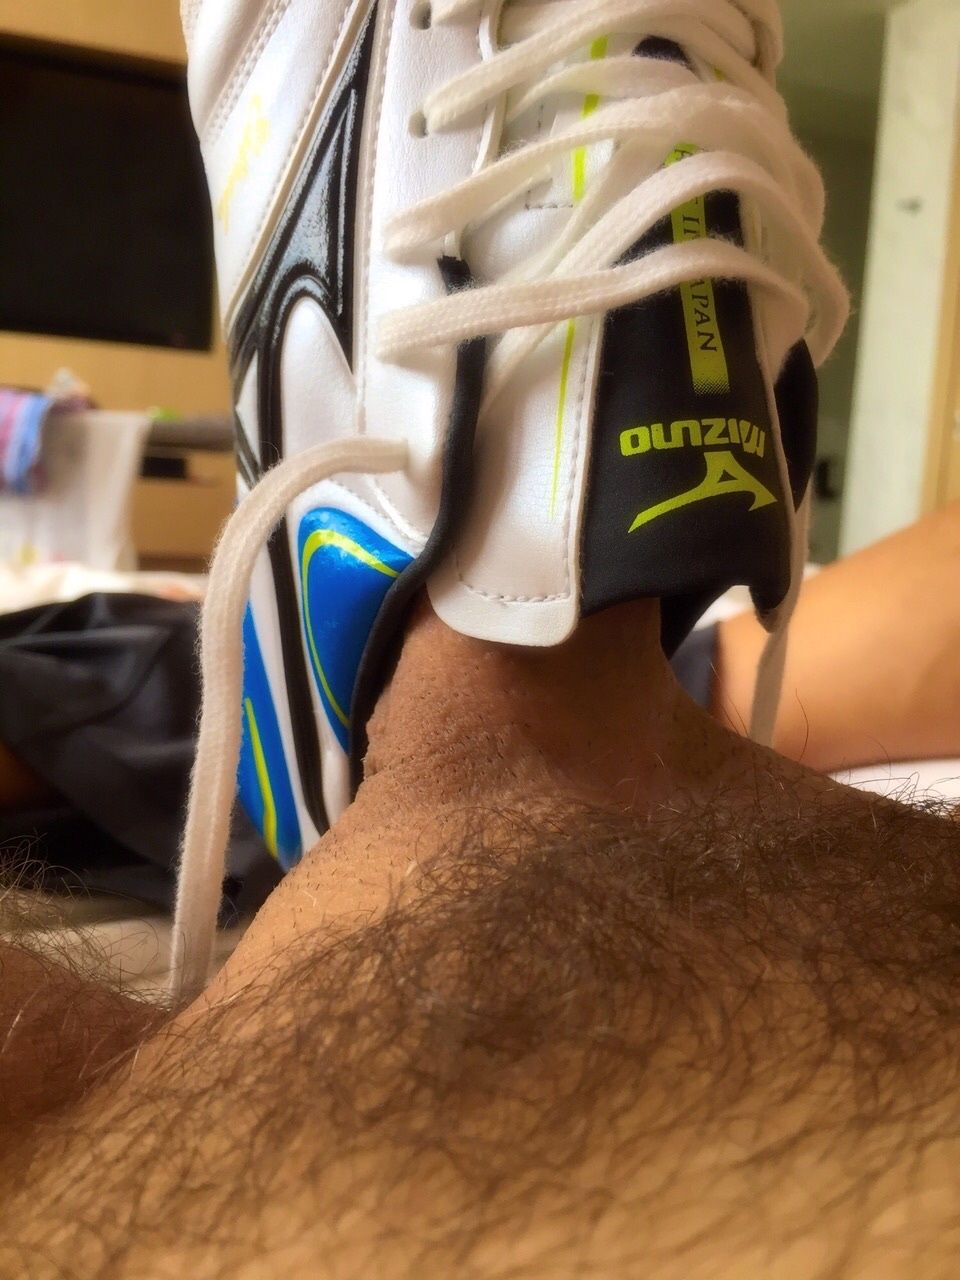 Some Hot Sneakers From my Past #19